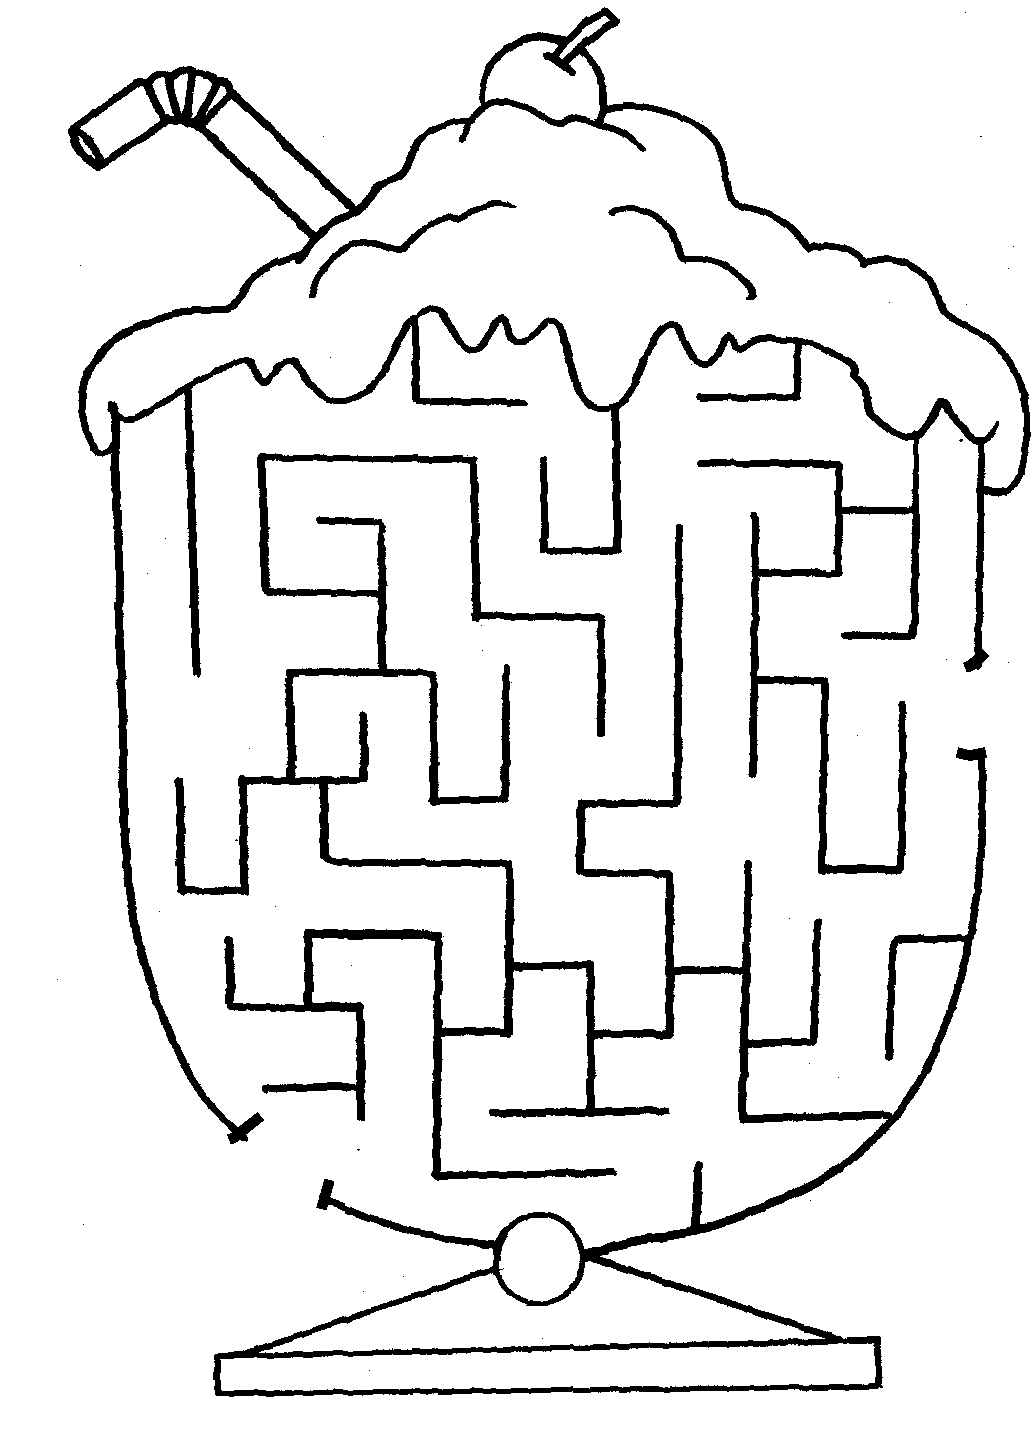 Coloring page: Labyrinths (Educational) #126430 - Free Printable Coloring Pages